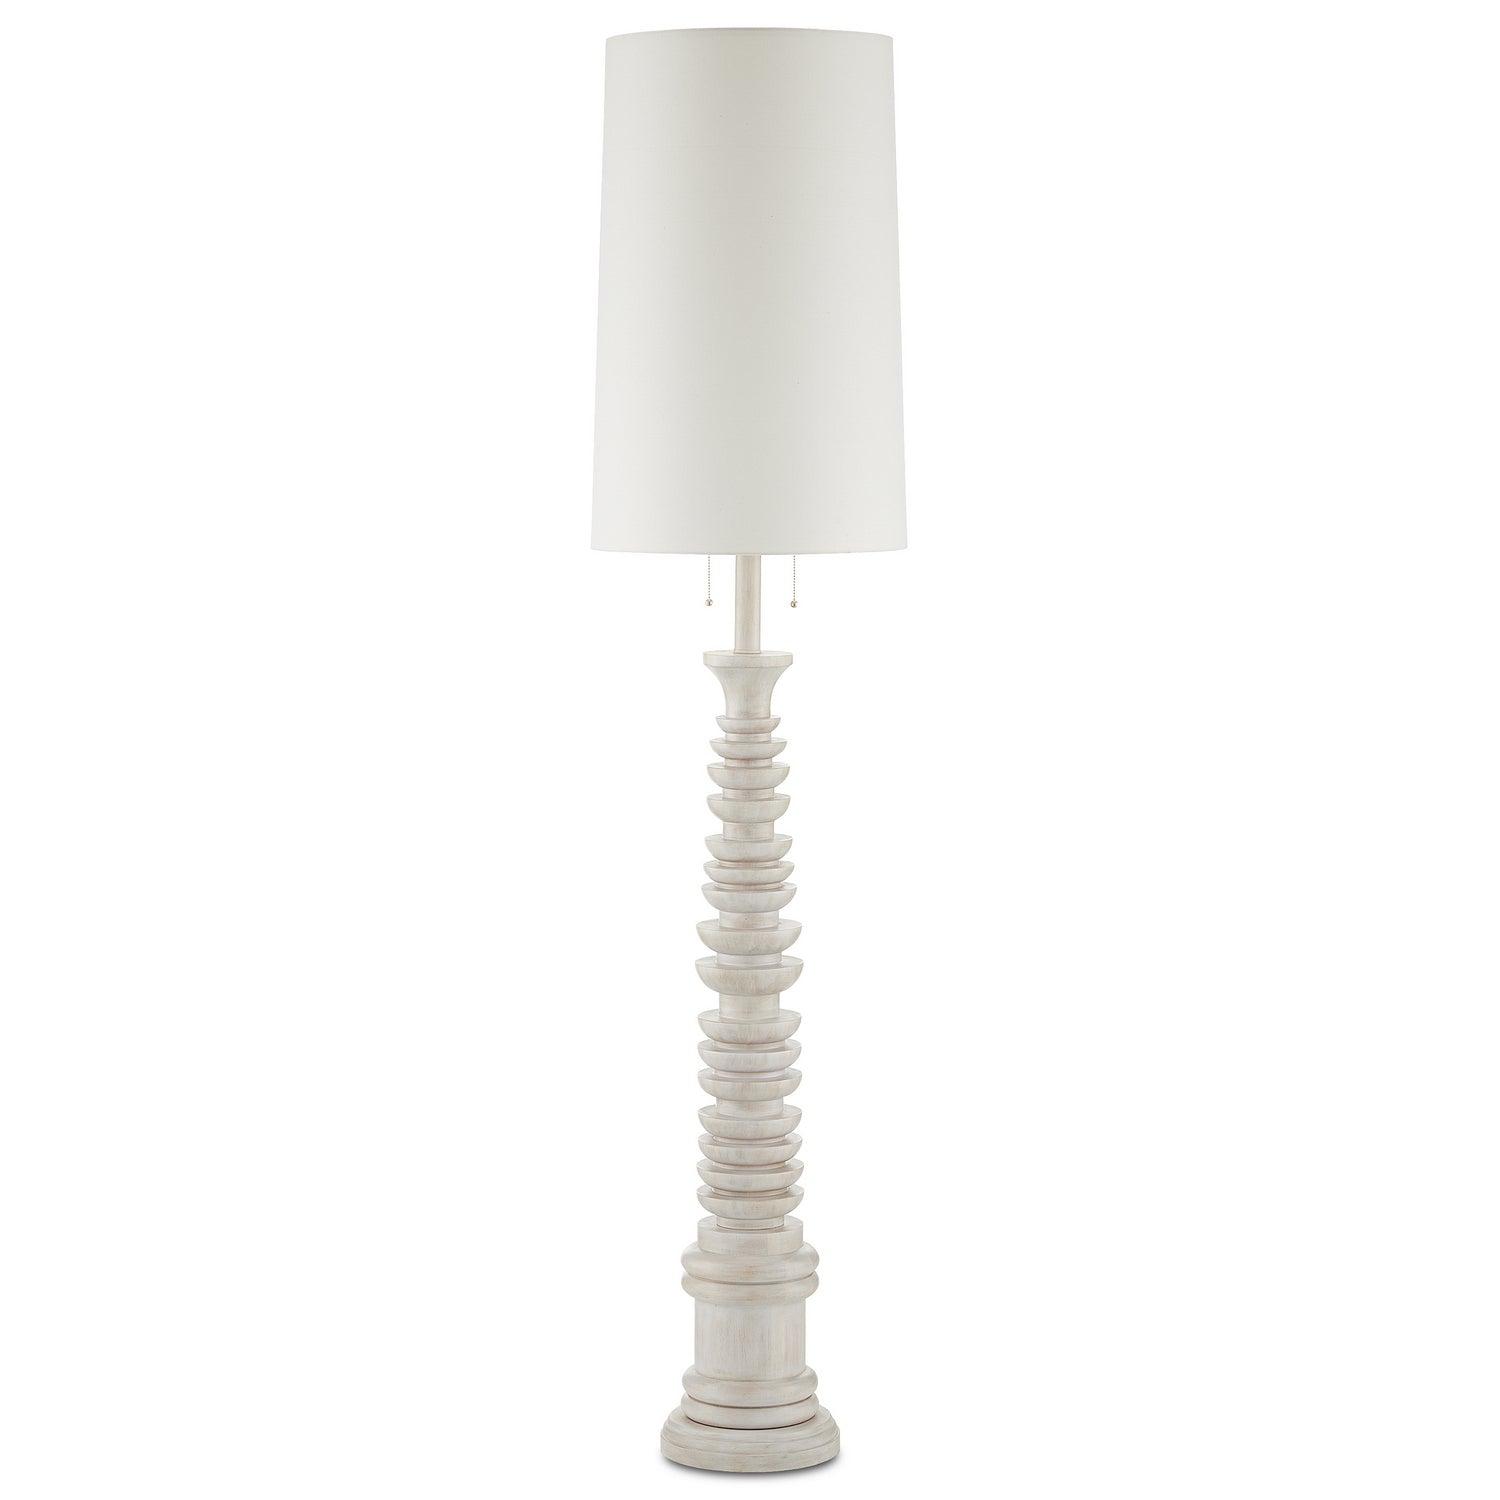 Two Light Floor Lamp from the Phyllis Morris collection in Whitewash finish